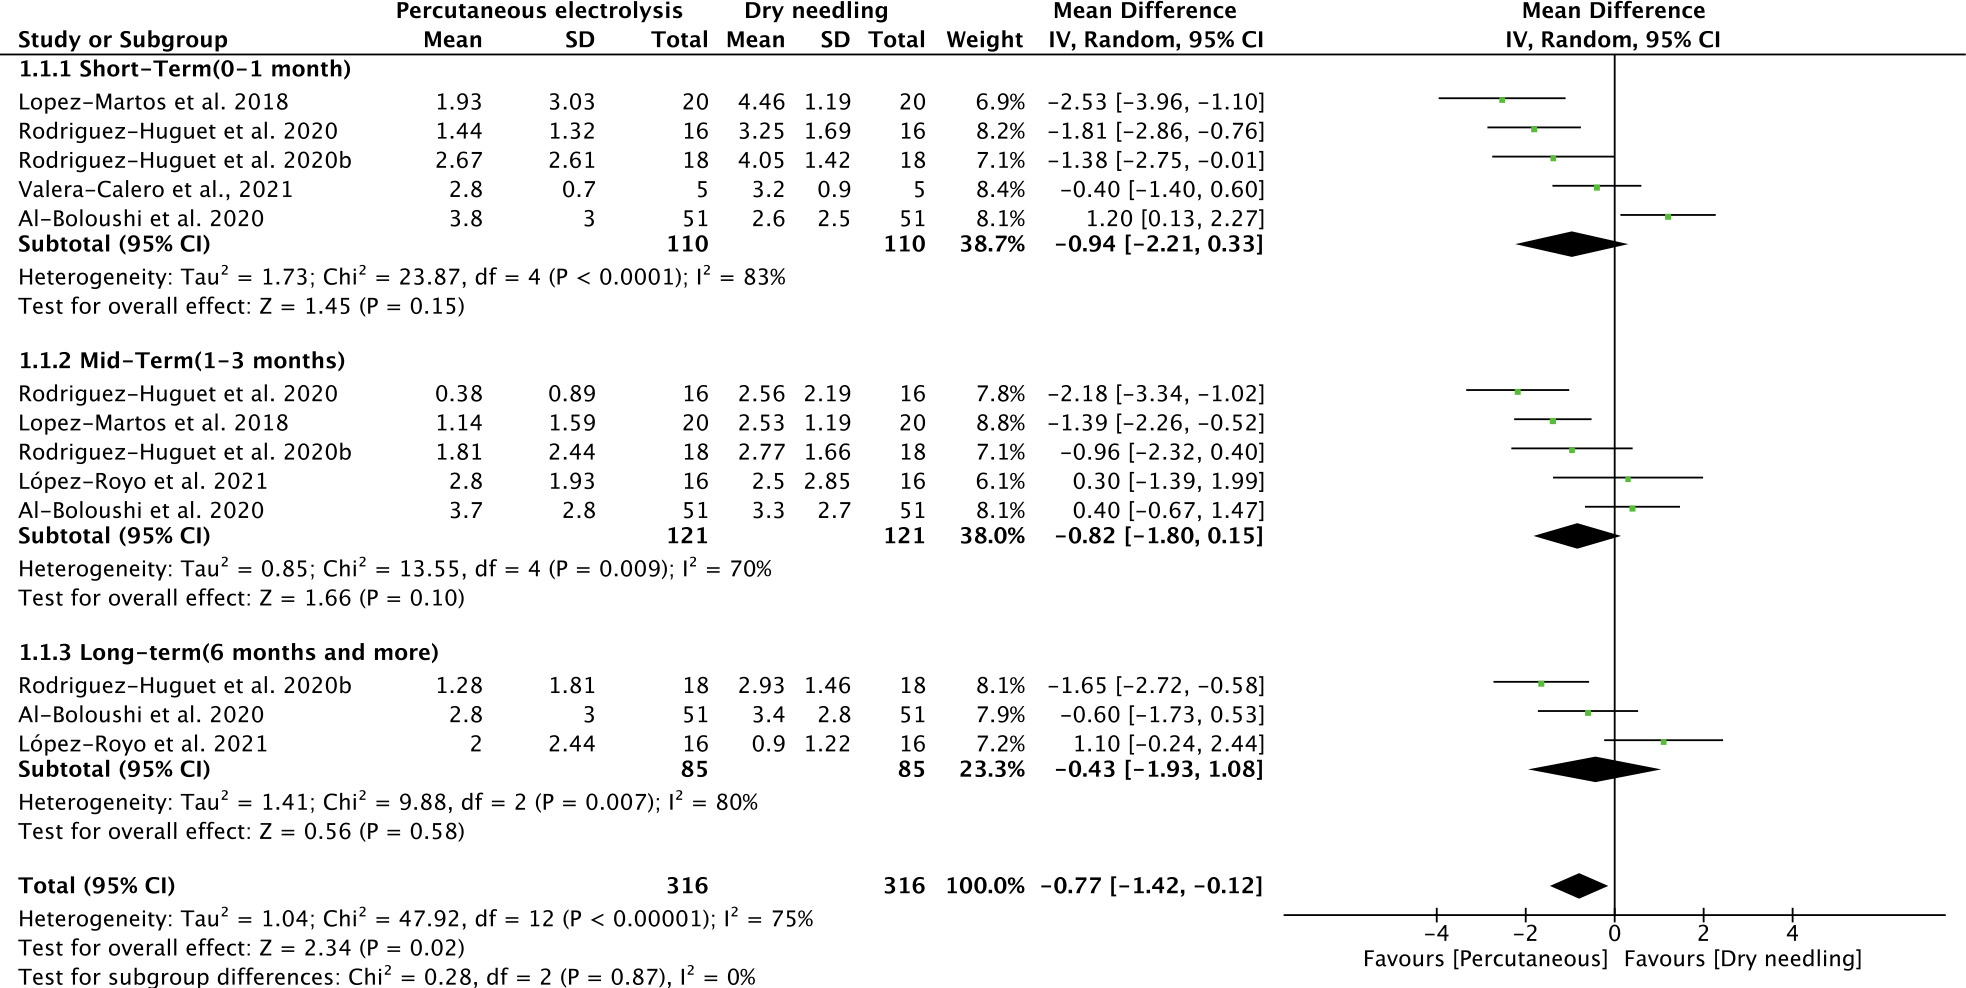 Comparison (mean difference) of the effects of percutaneous electrolysis versus dry needling on pain intensity.